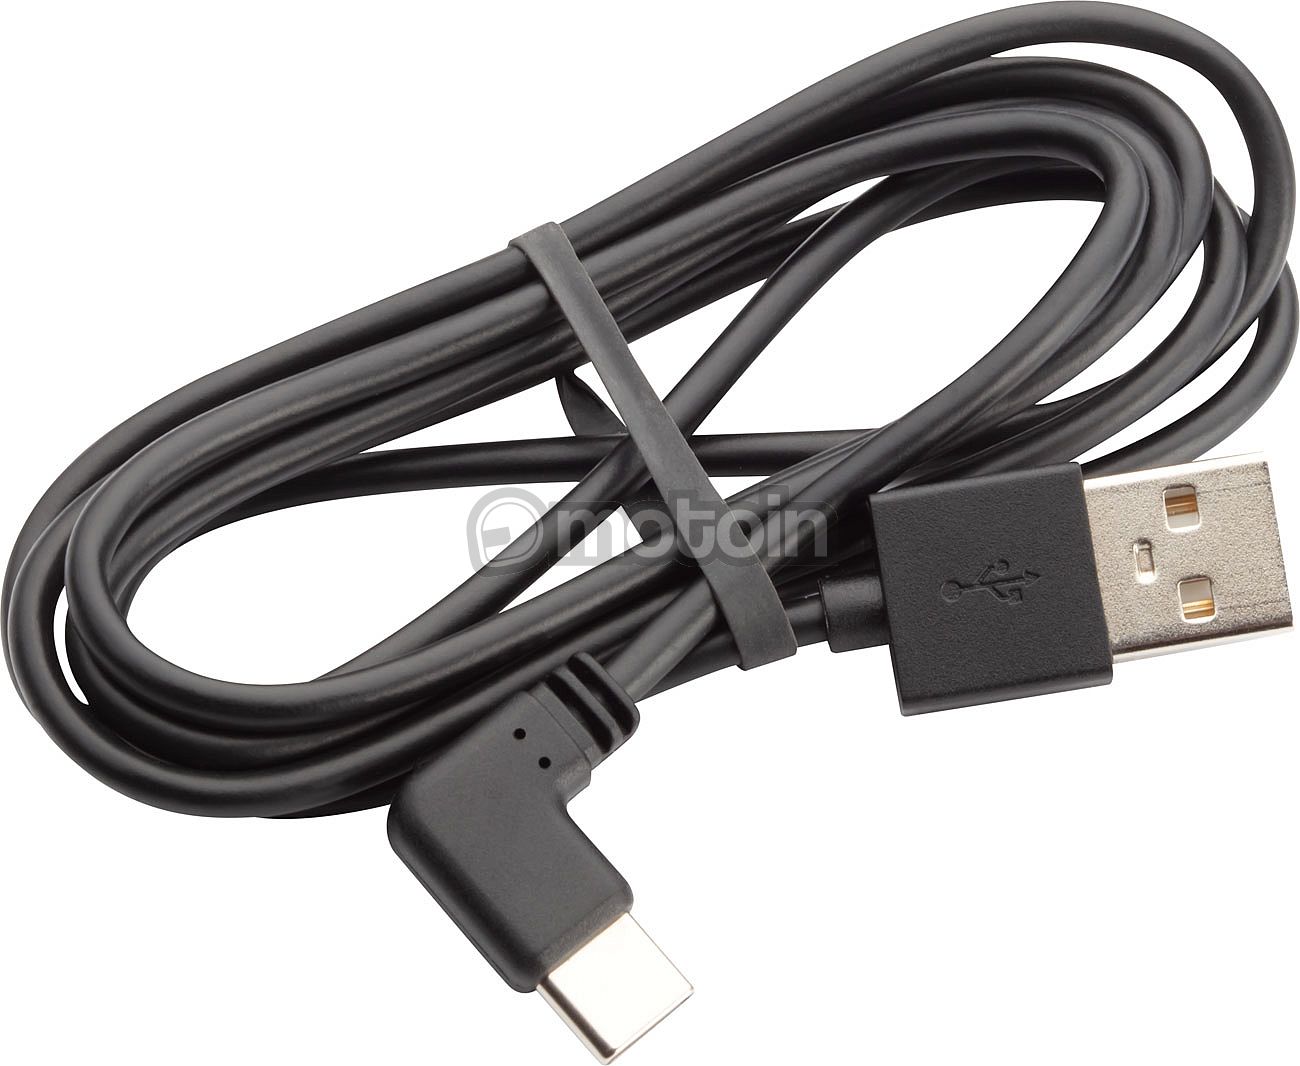 Schuberth USB-C, charging cable